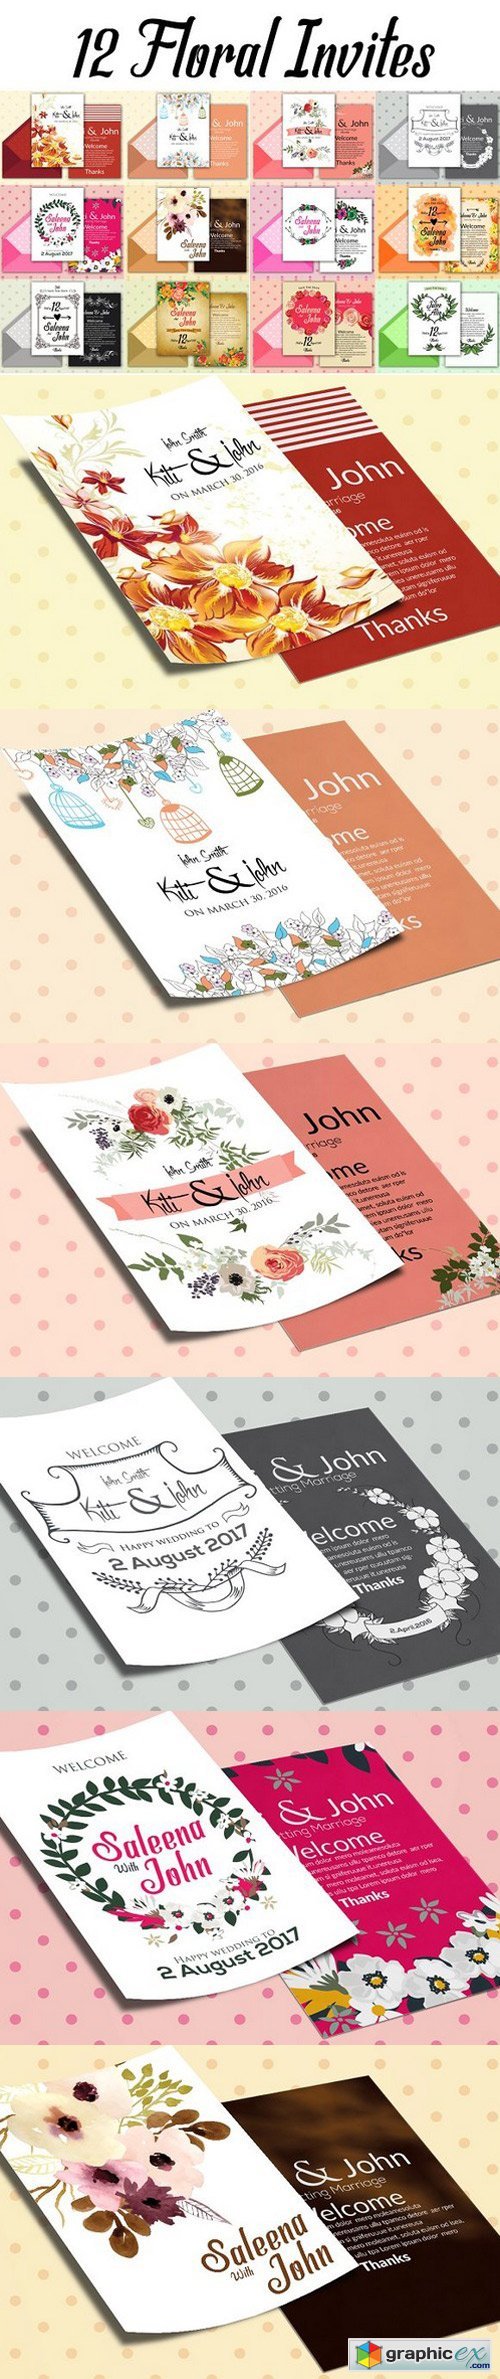 12 Double Sided Invitation Cards